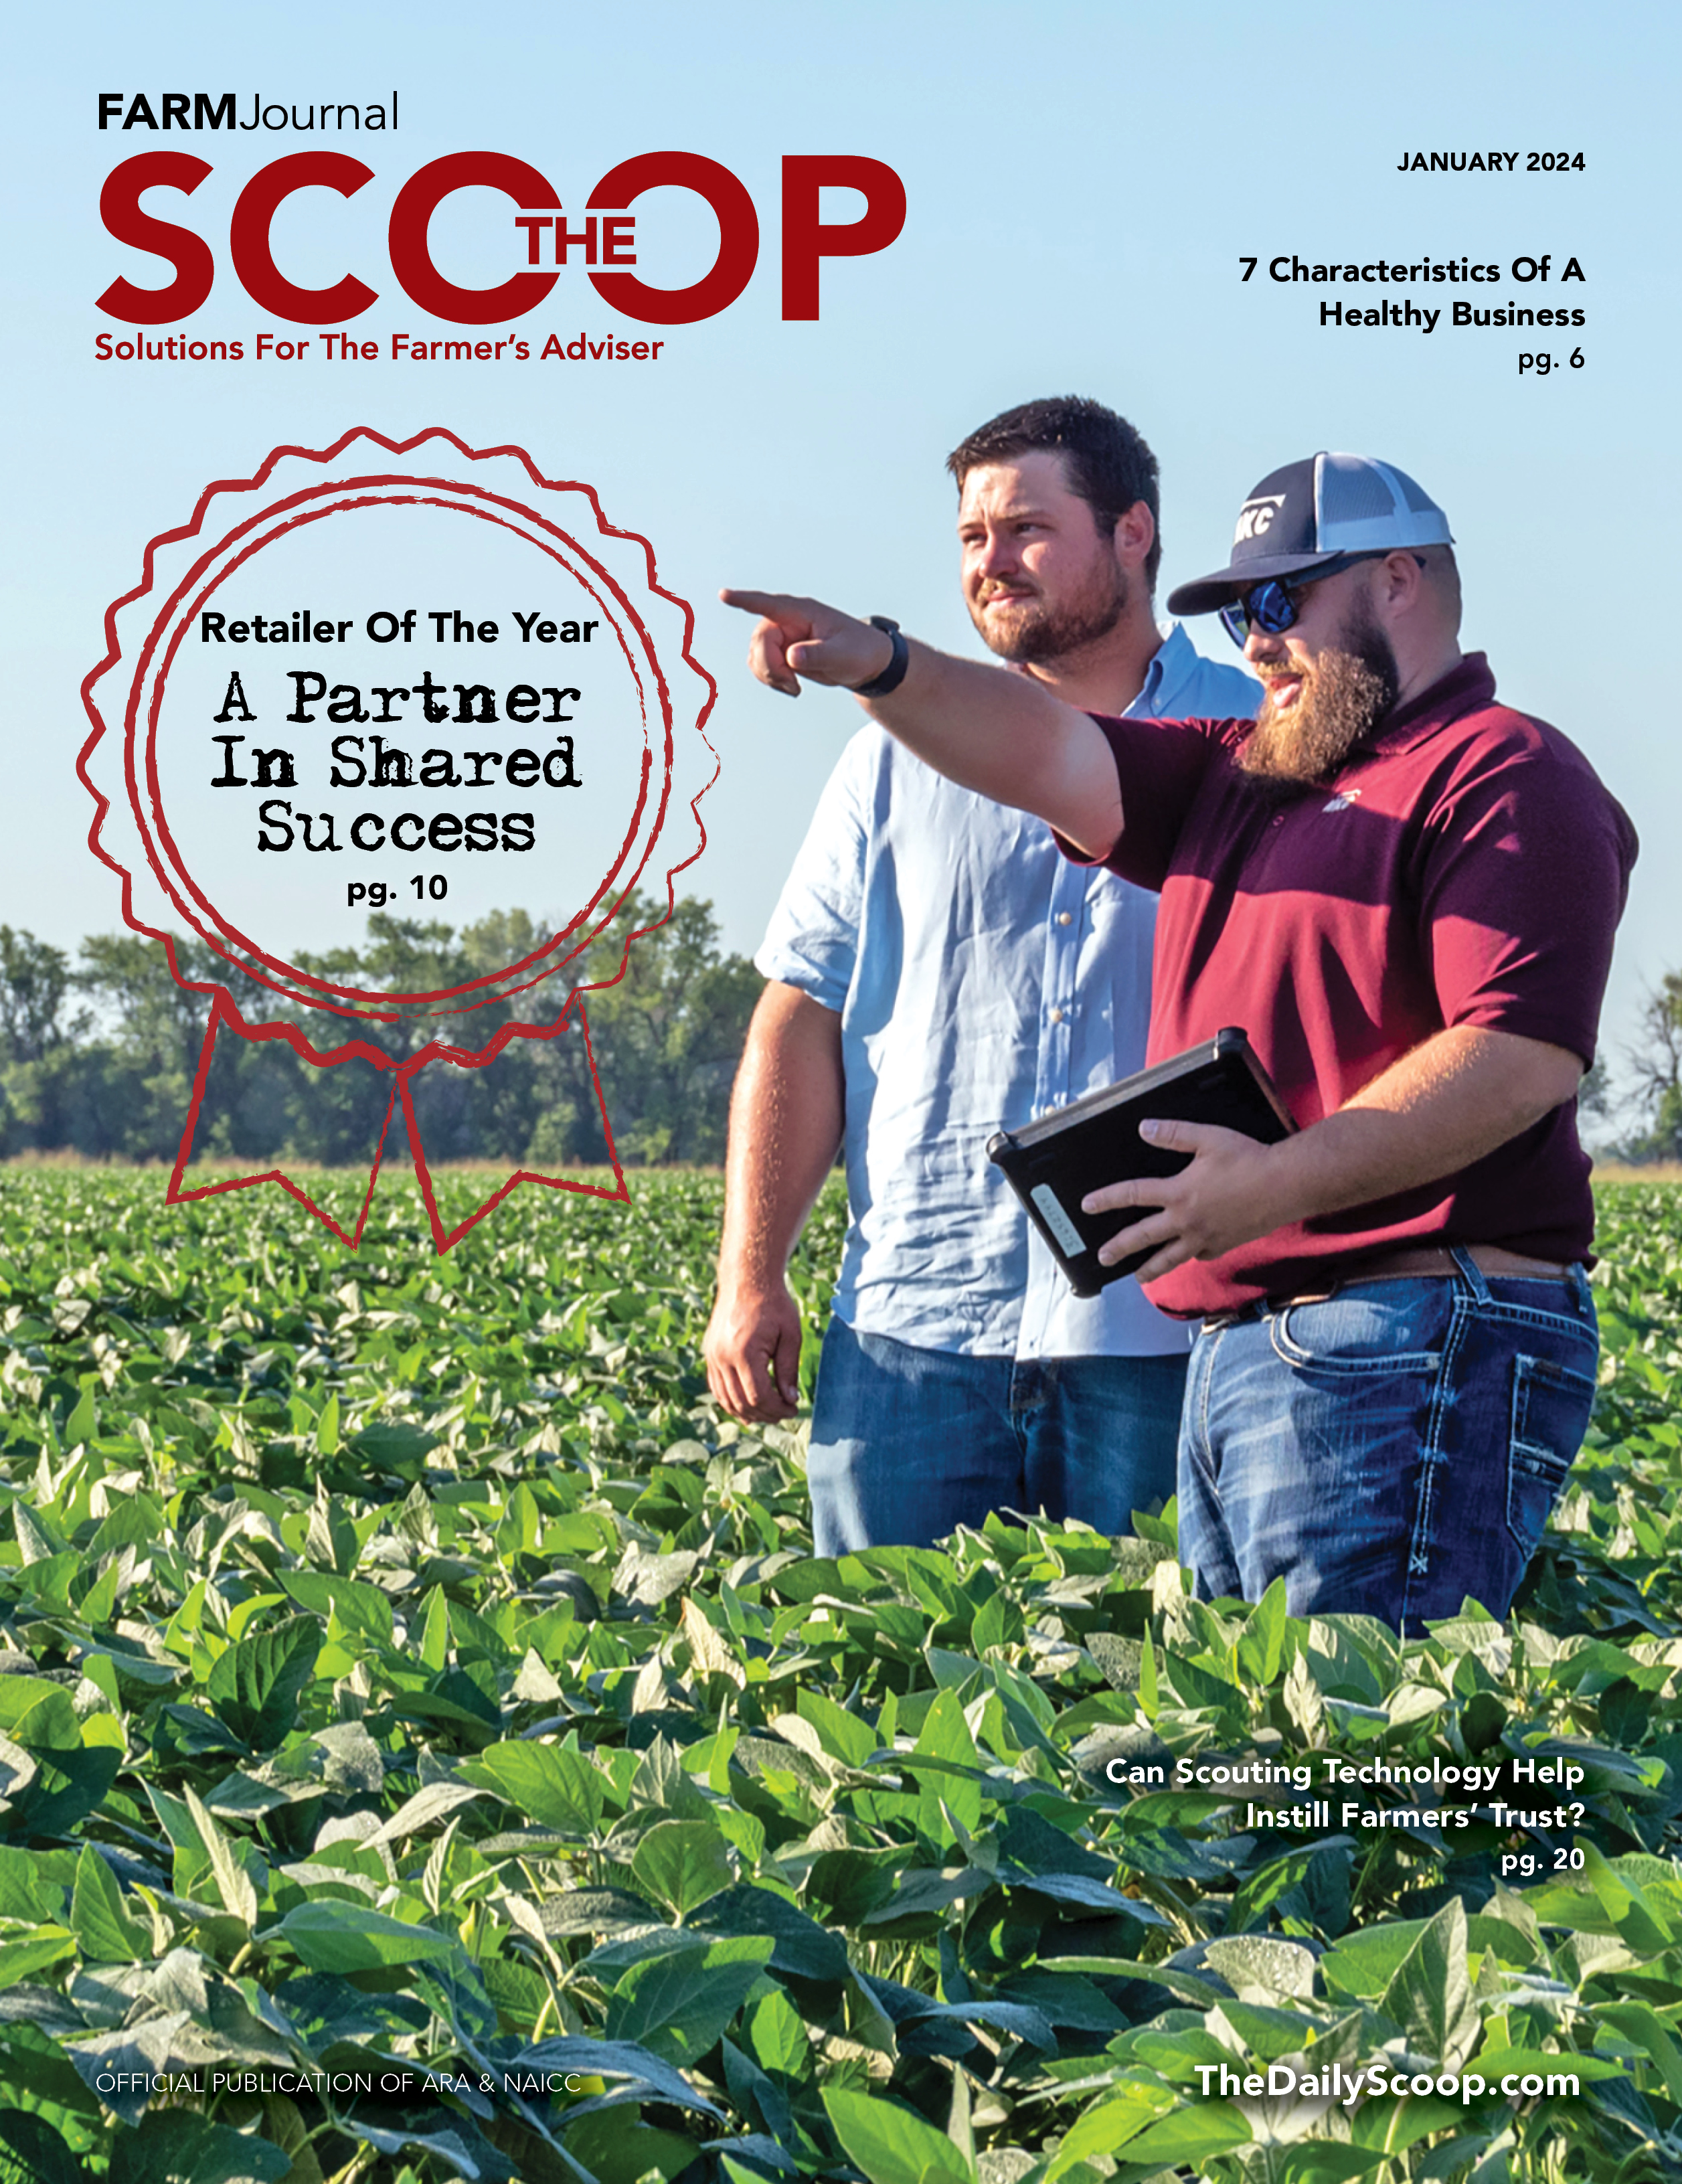  The Scoop - January 2024 